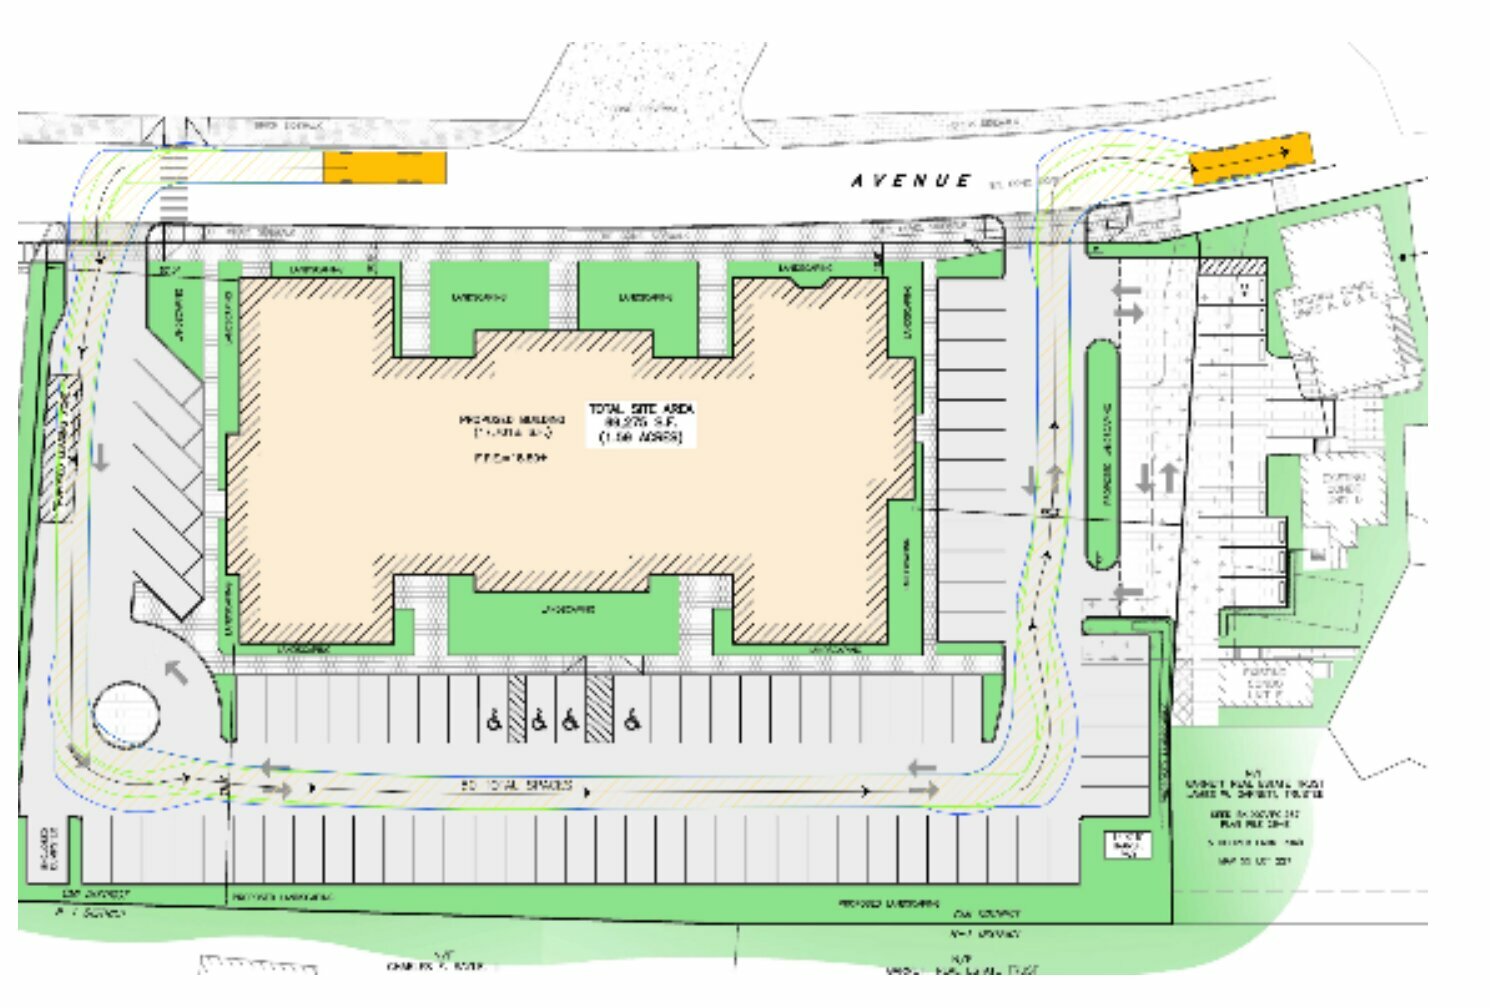 Developer Chris Fiumara has proposed a mixed-use housing and commercial complex off Sparks Avenue near the Stop & Shop supermarket. The mini-rotary at bottom left has been removed from the proposal.